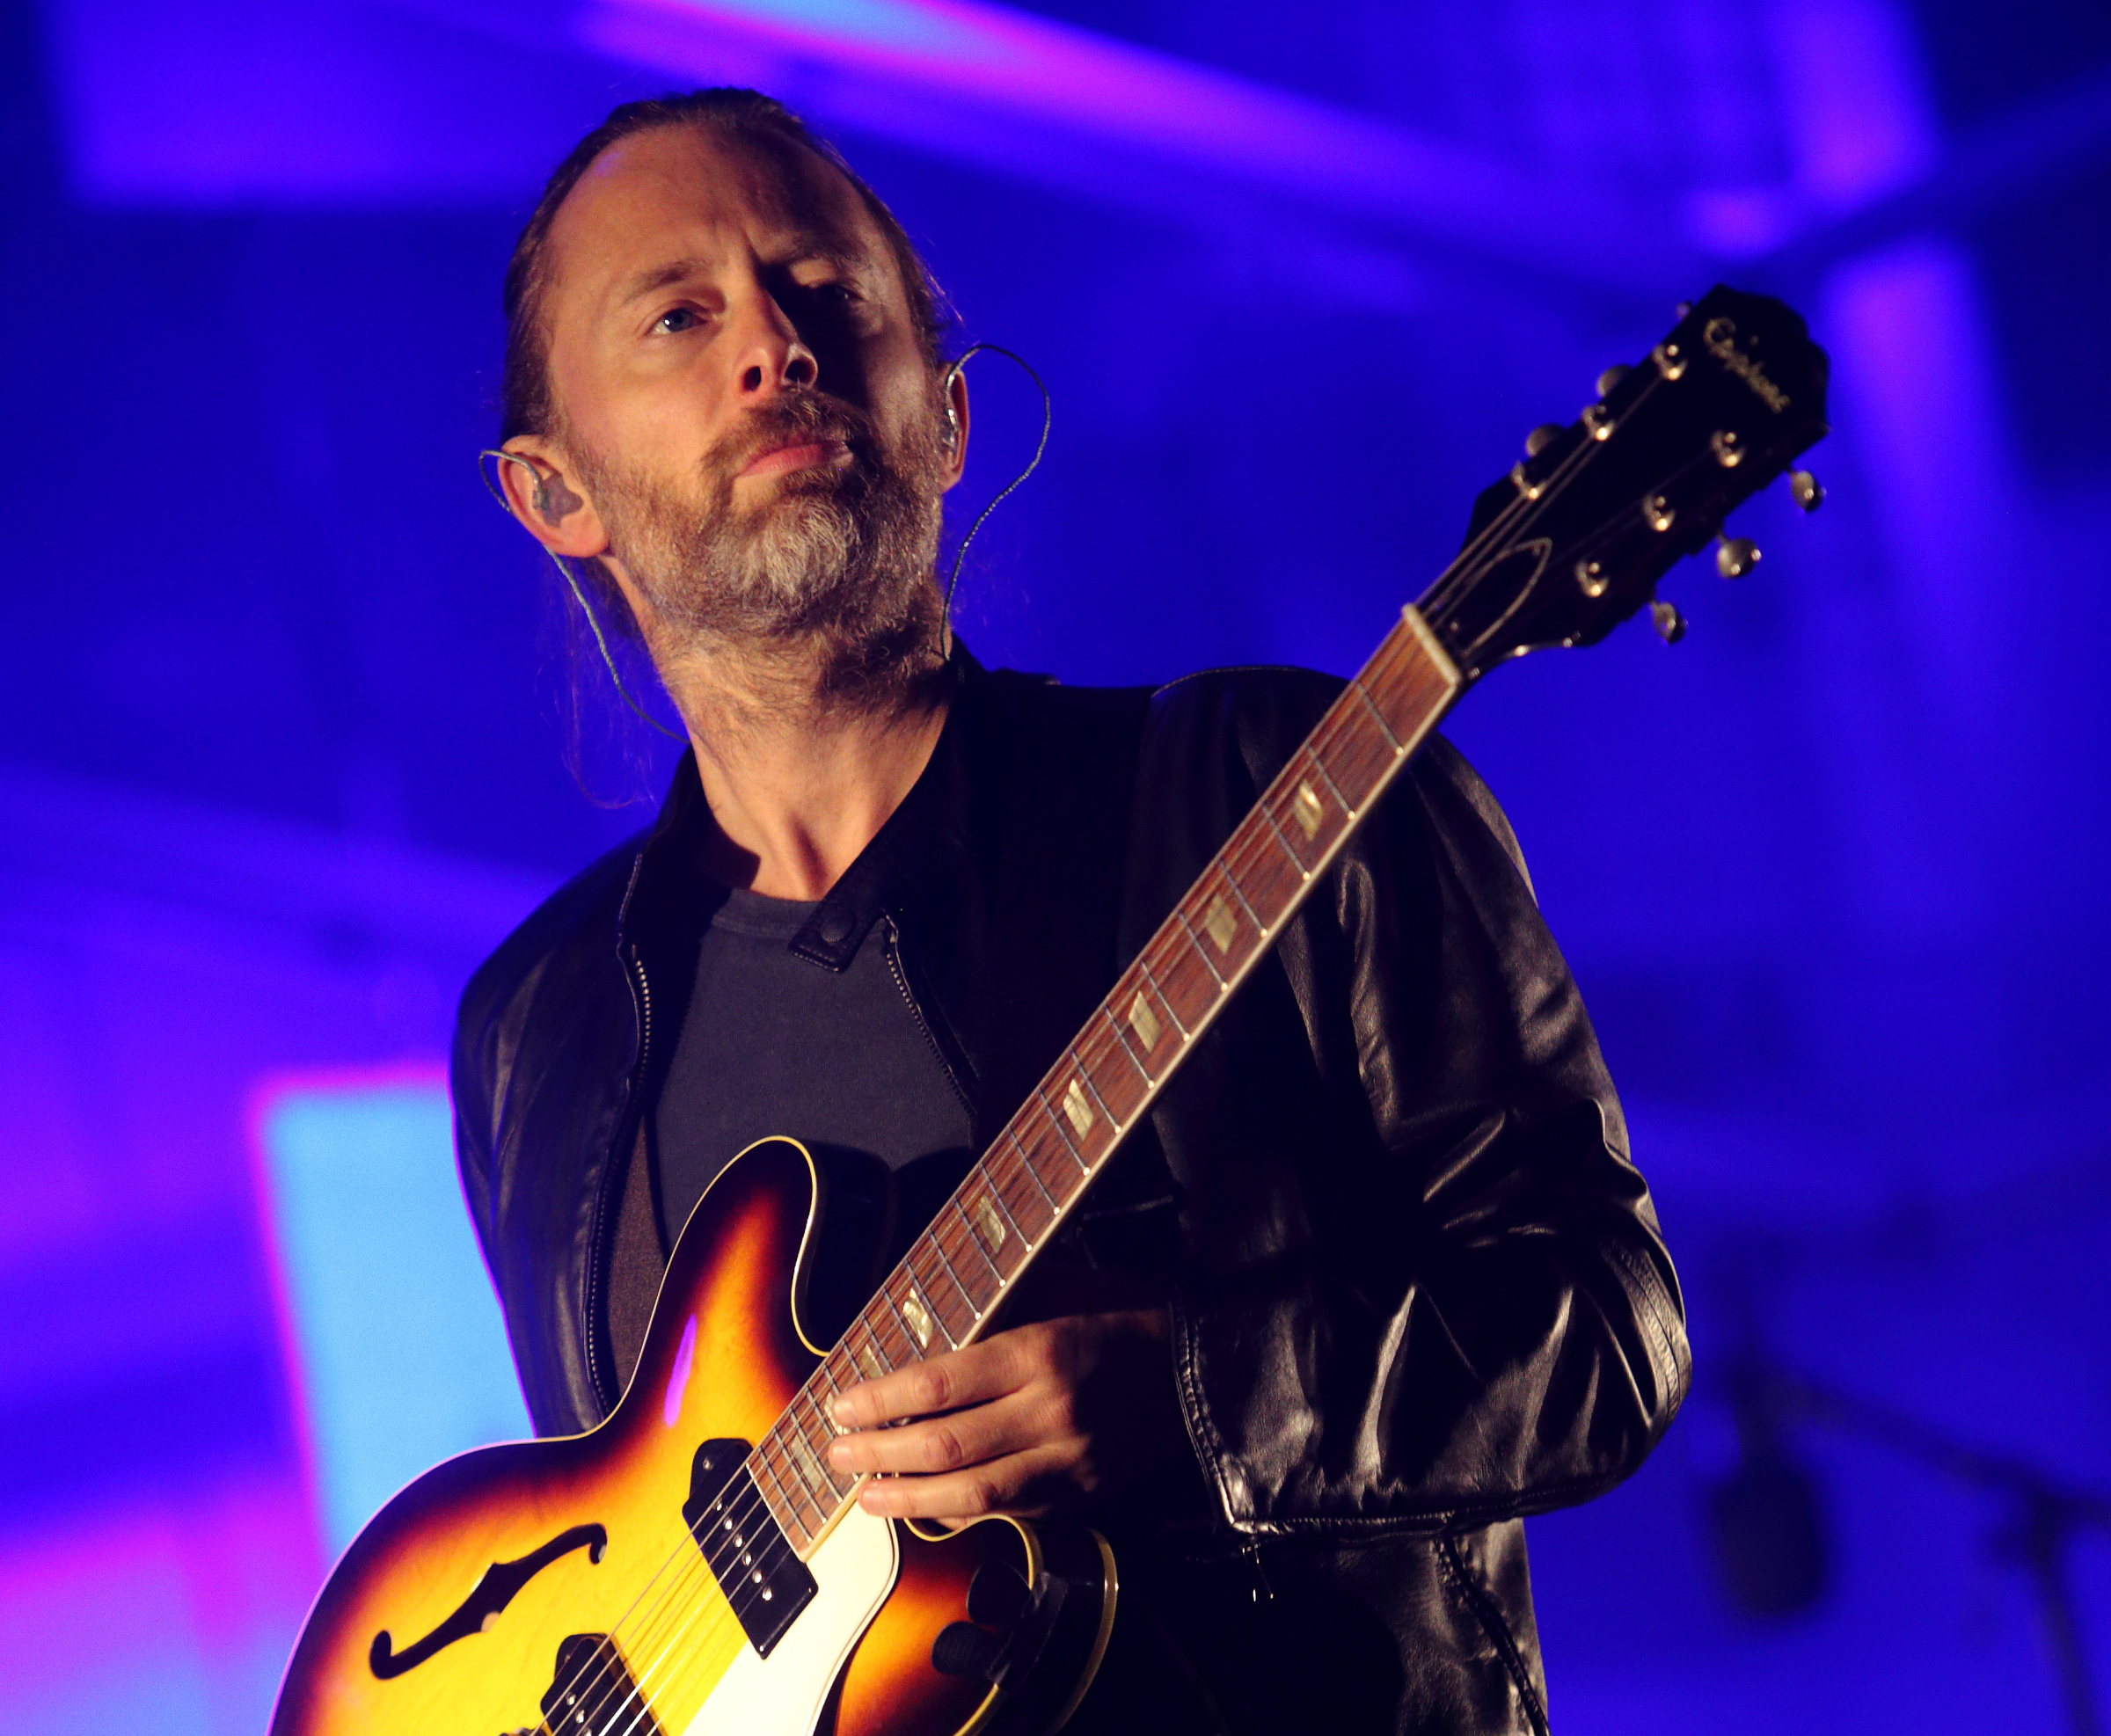 Thom Yorke, Atoms For Peace, Austin City Limits Music Festival